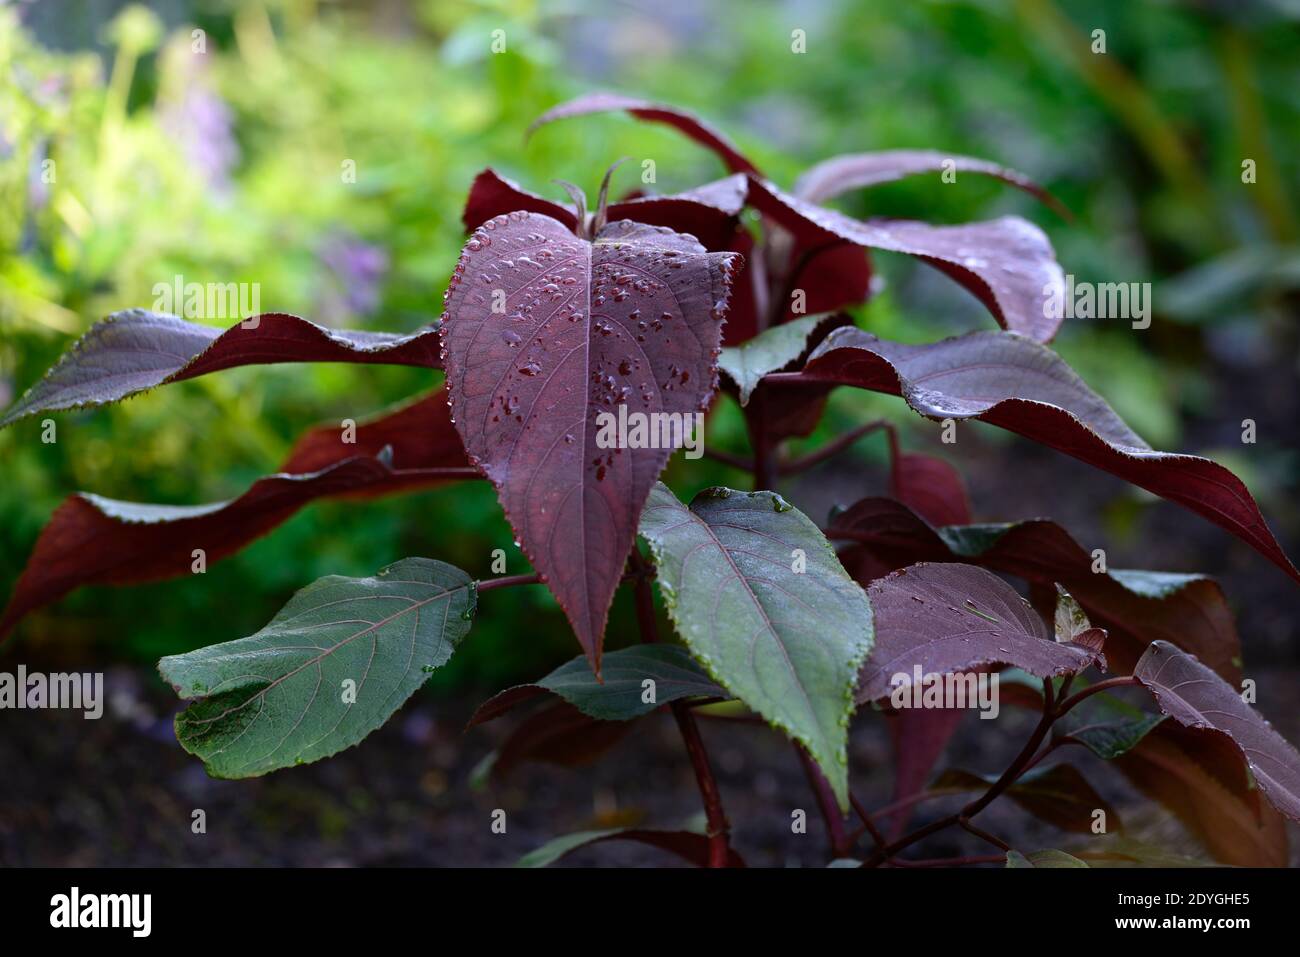 Populus deltoides Purple Tower,tree,leaves,foliage,pollard,pollarded,coppice,coppiced,tree,trees,shrub,shrubs,suitable for pollarding,rounded wine-red Stock Photo